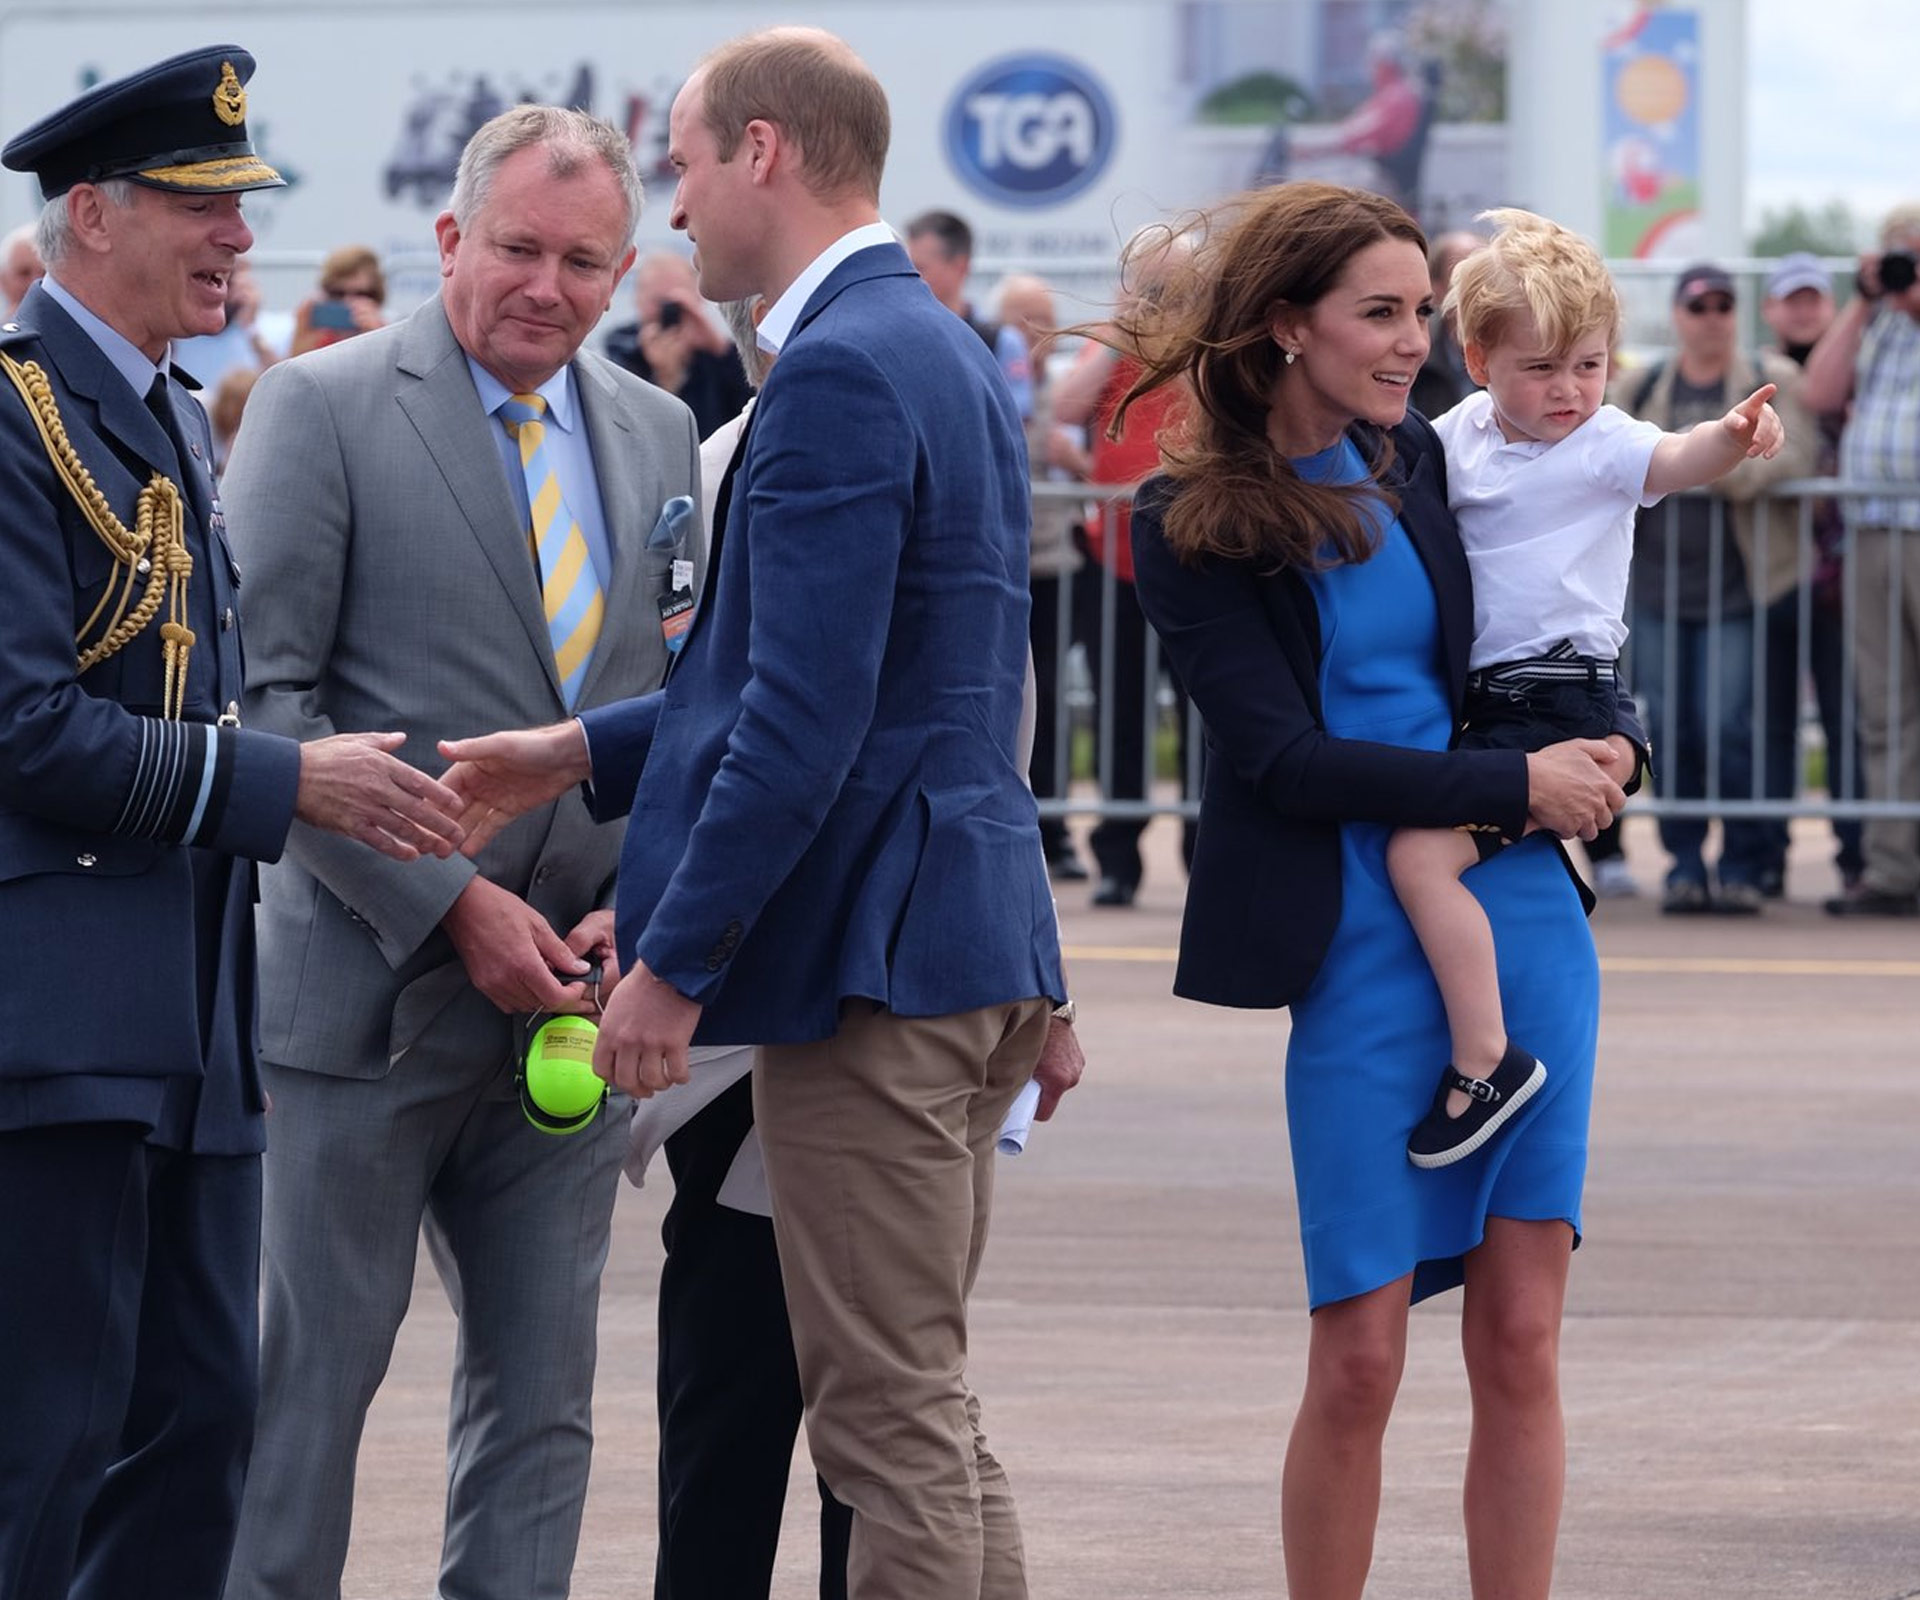 A soarin’ day with the Cambridges! Prince George sees the planes!